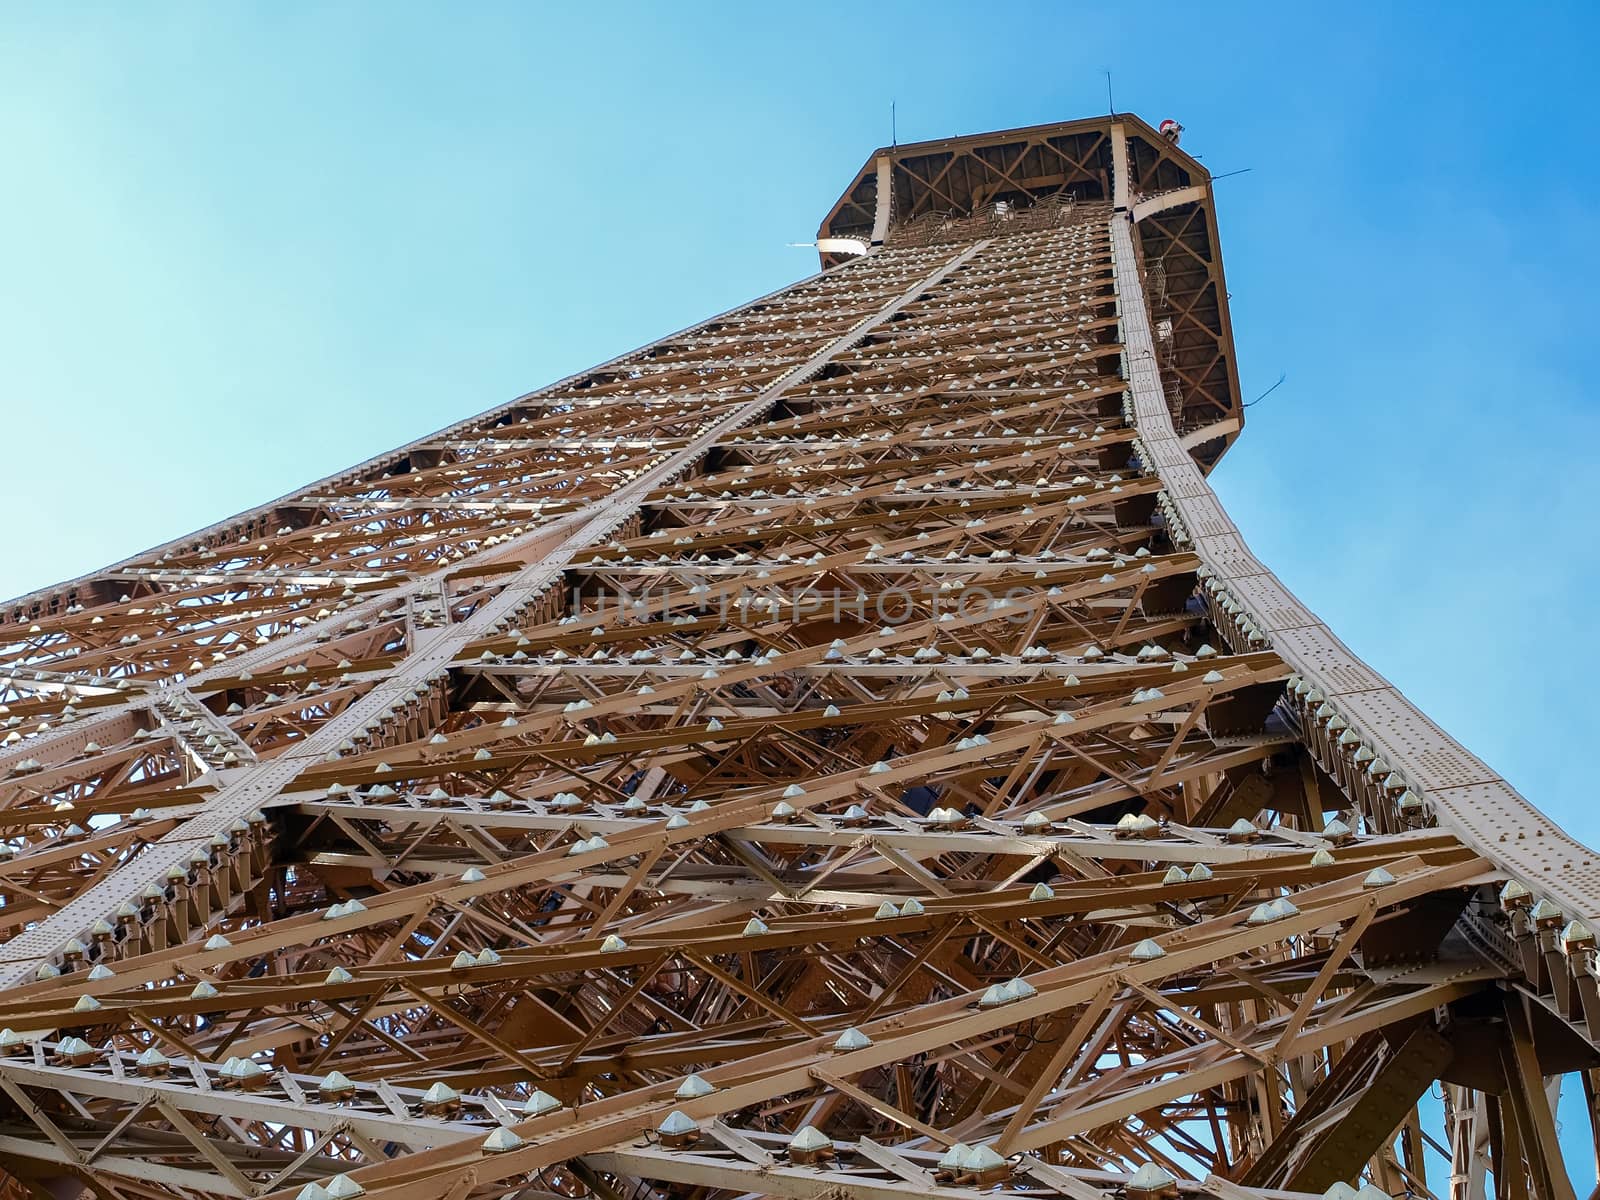 View from below of a fragment of the Eiffel Tower by anmbph